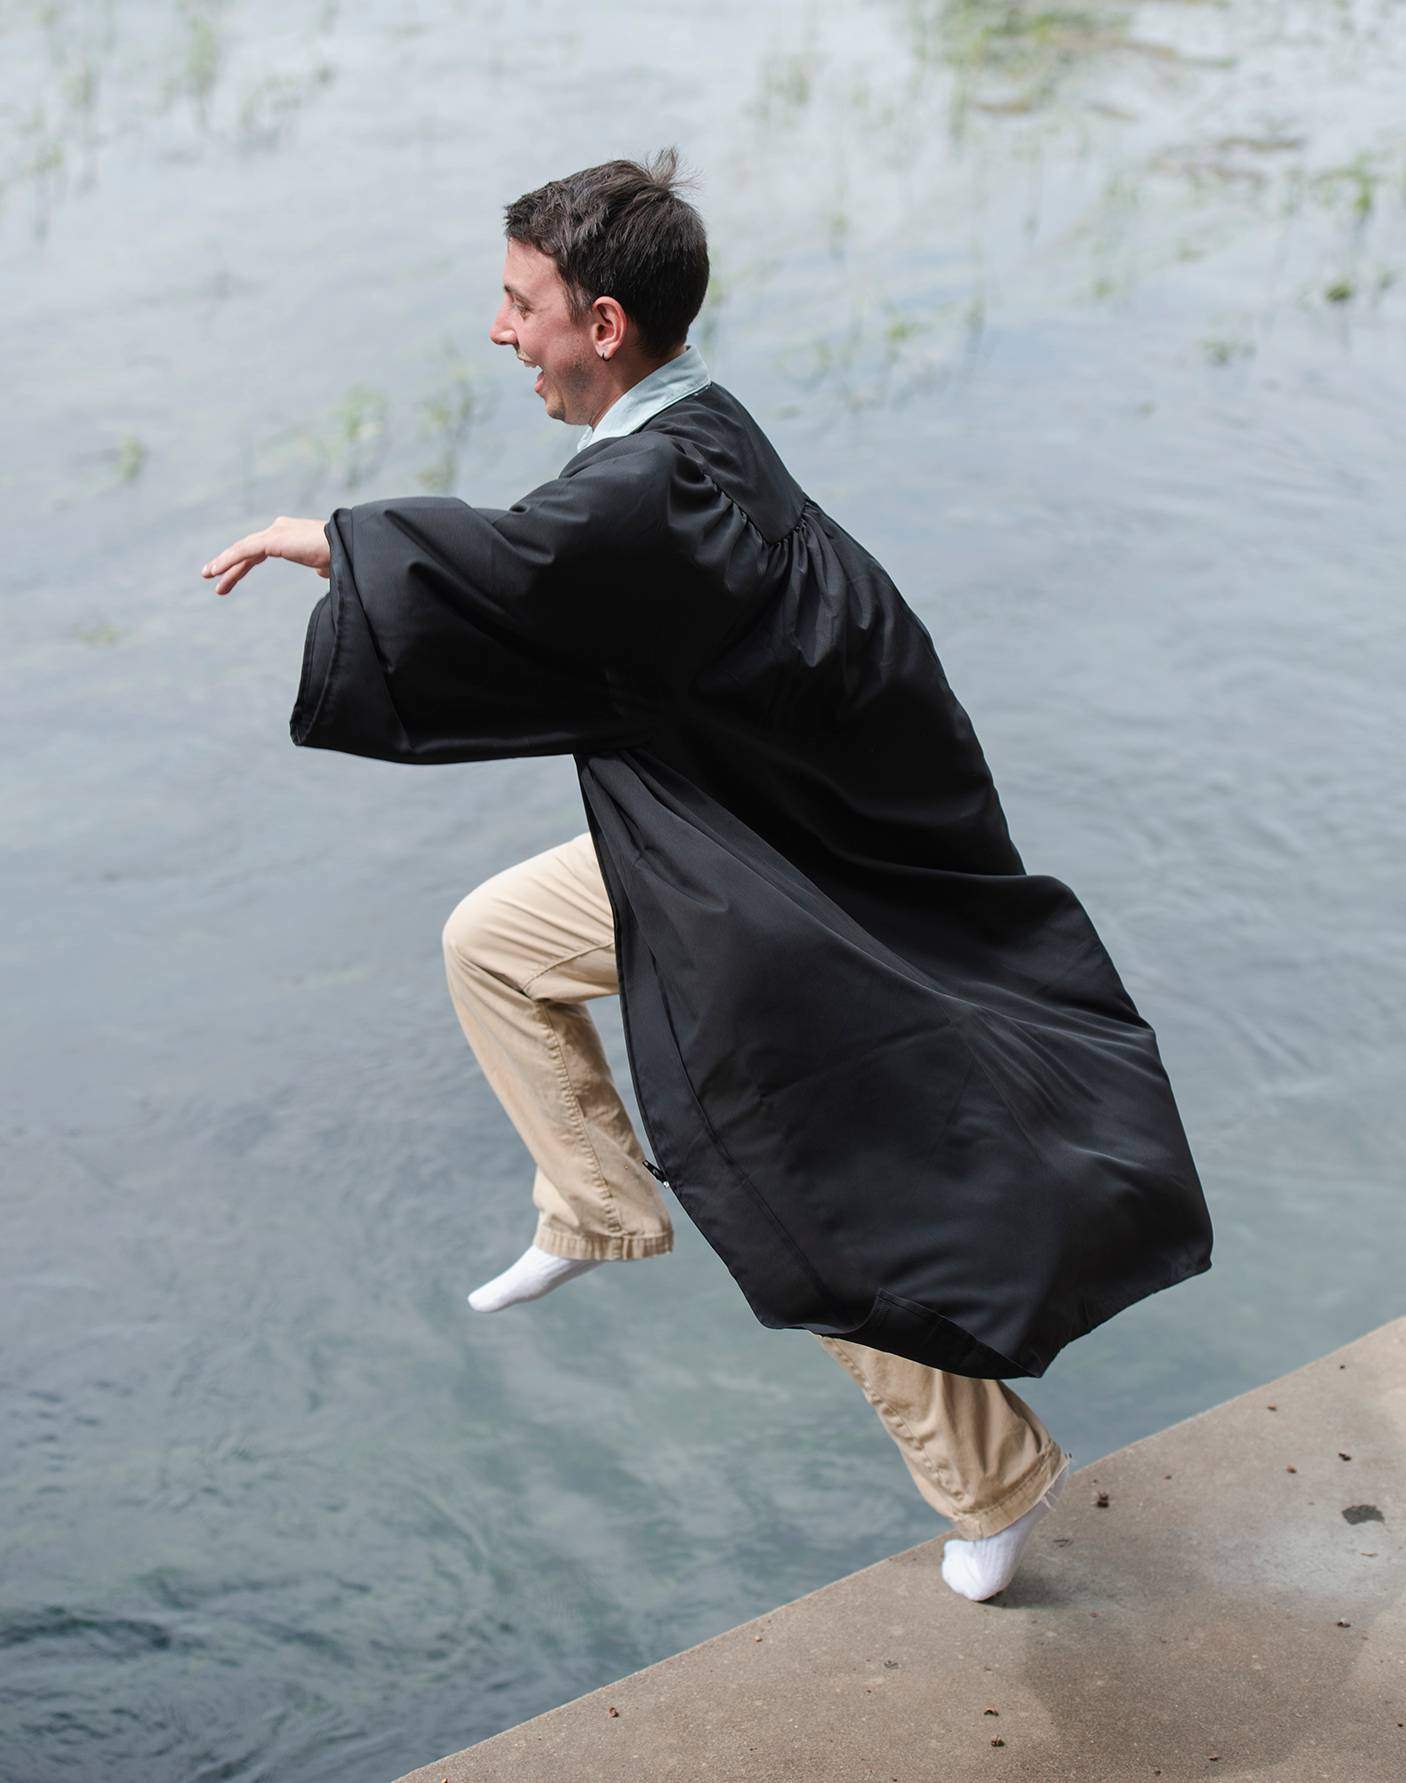 man jumping in river